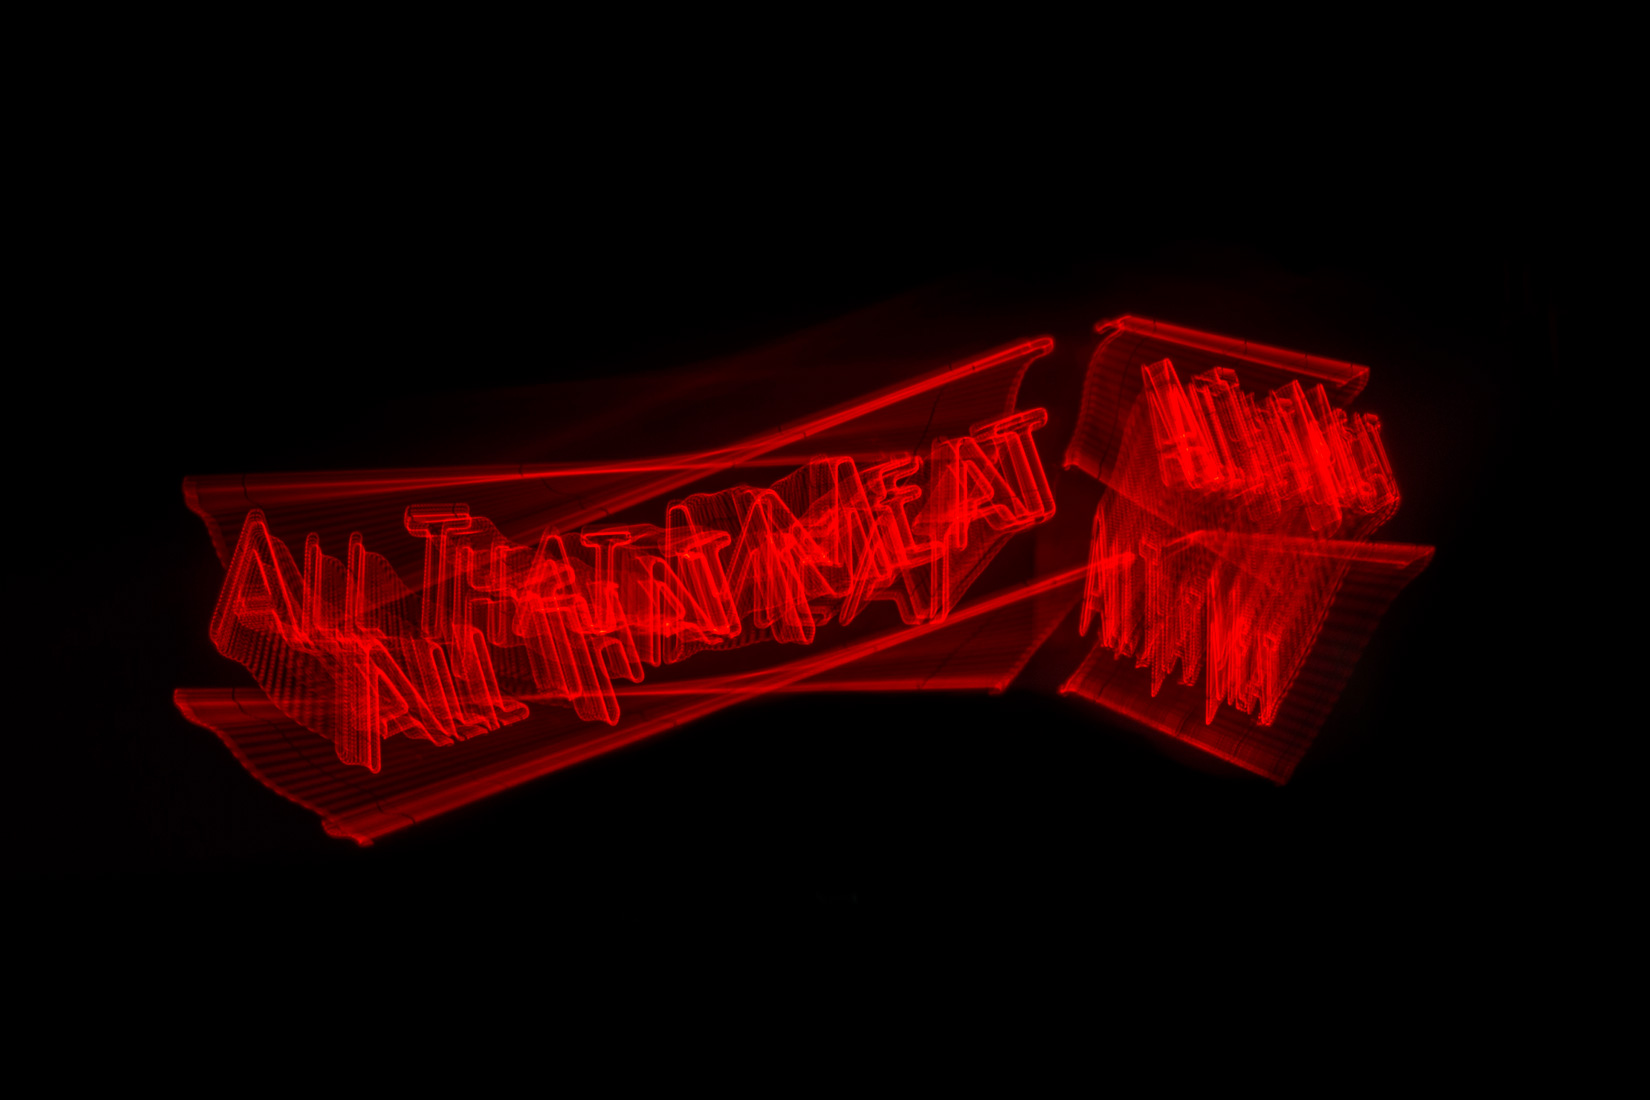 Light painting, mouvement, All that meat